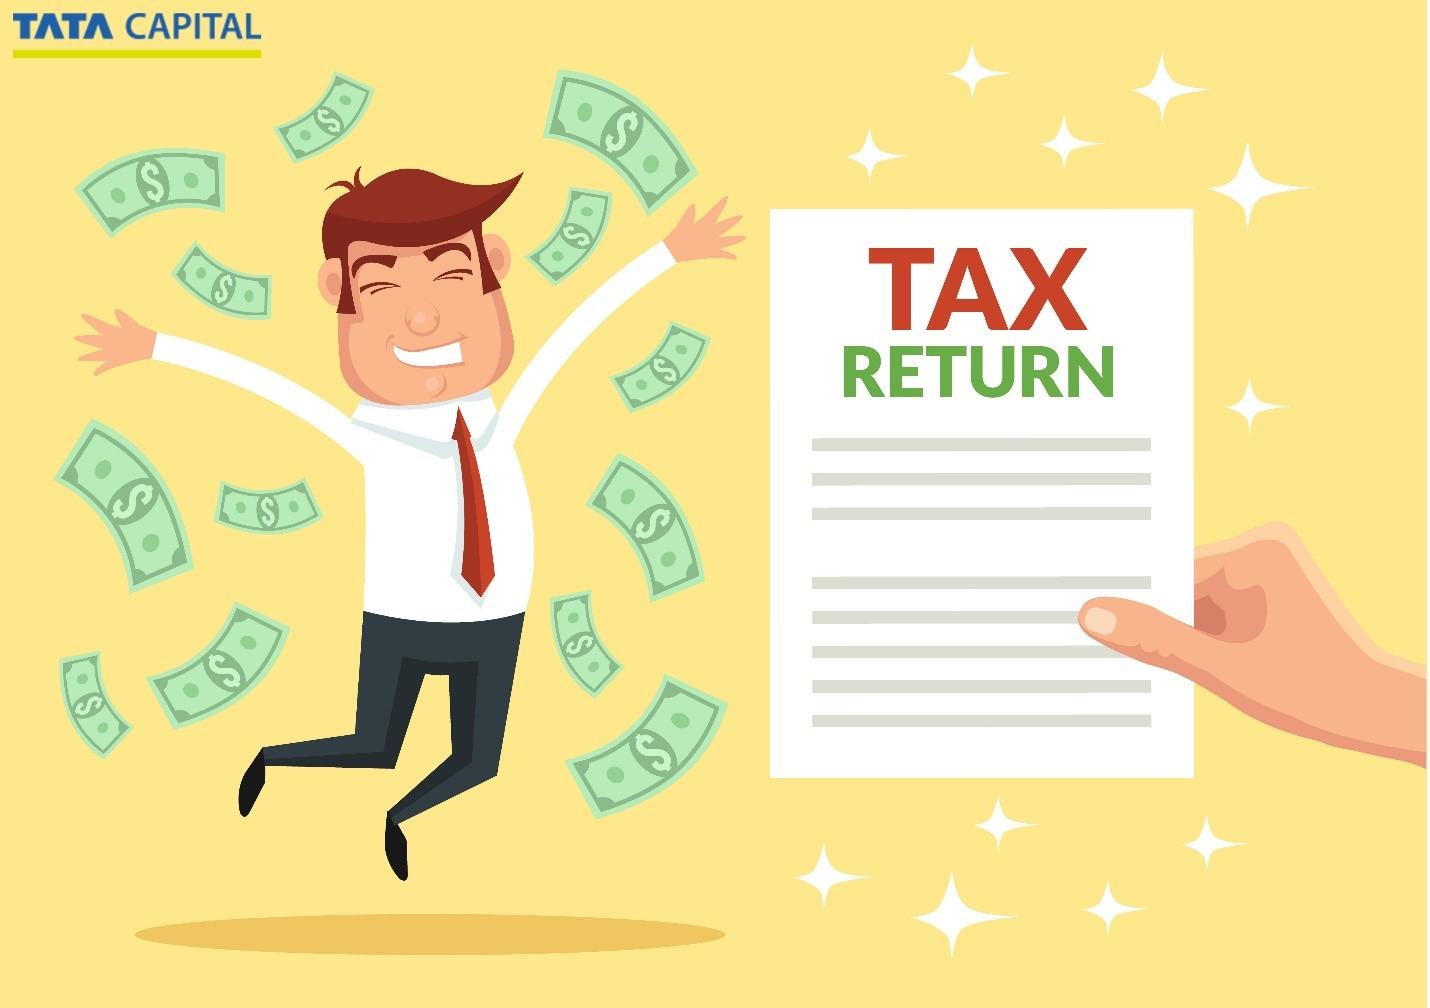 How To File Income Tax Return Online For A Salaried Employee